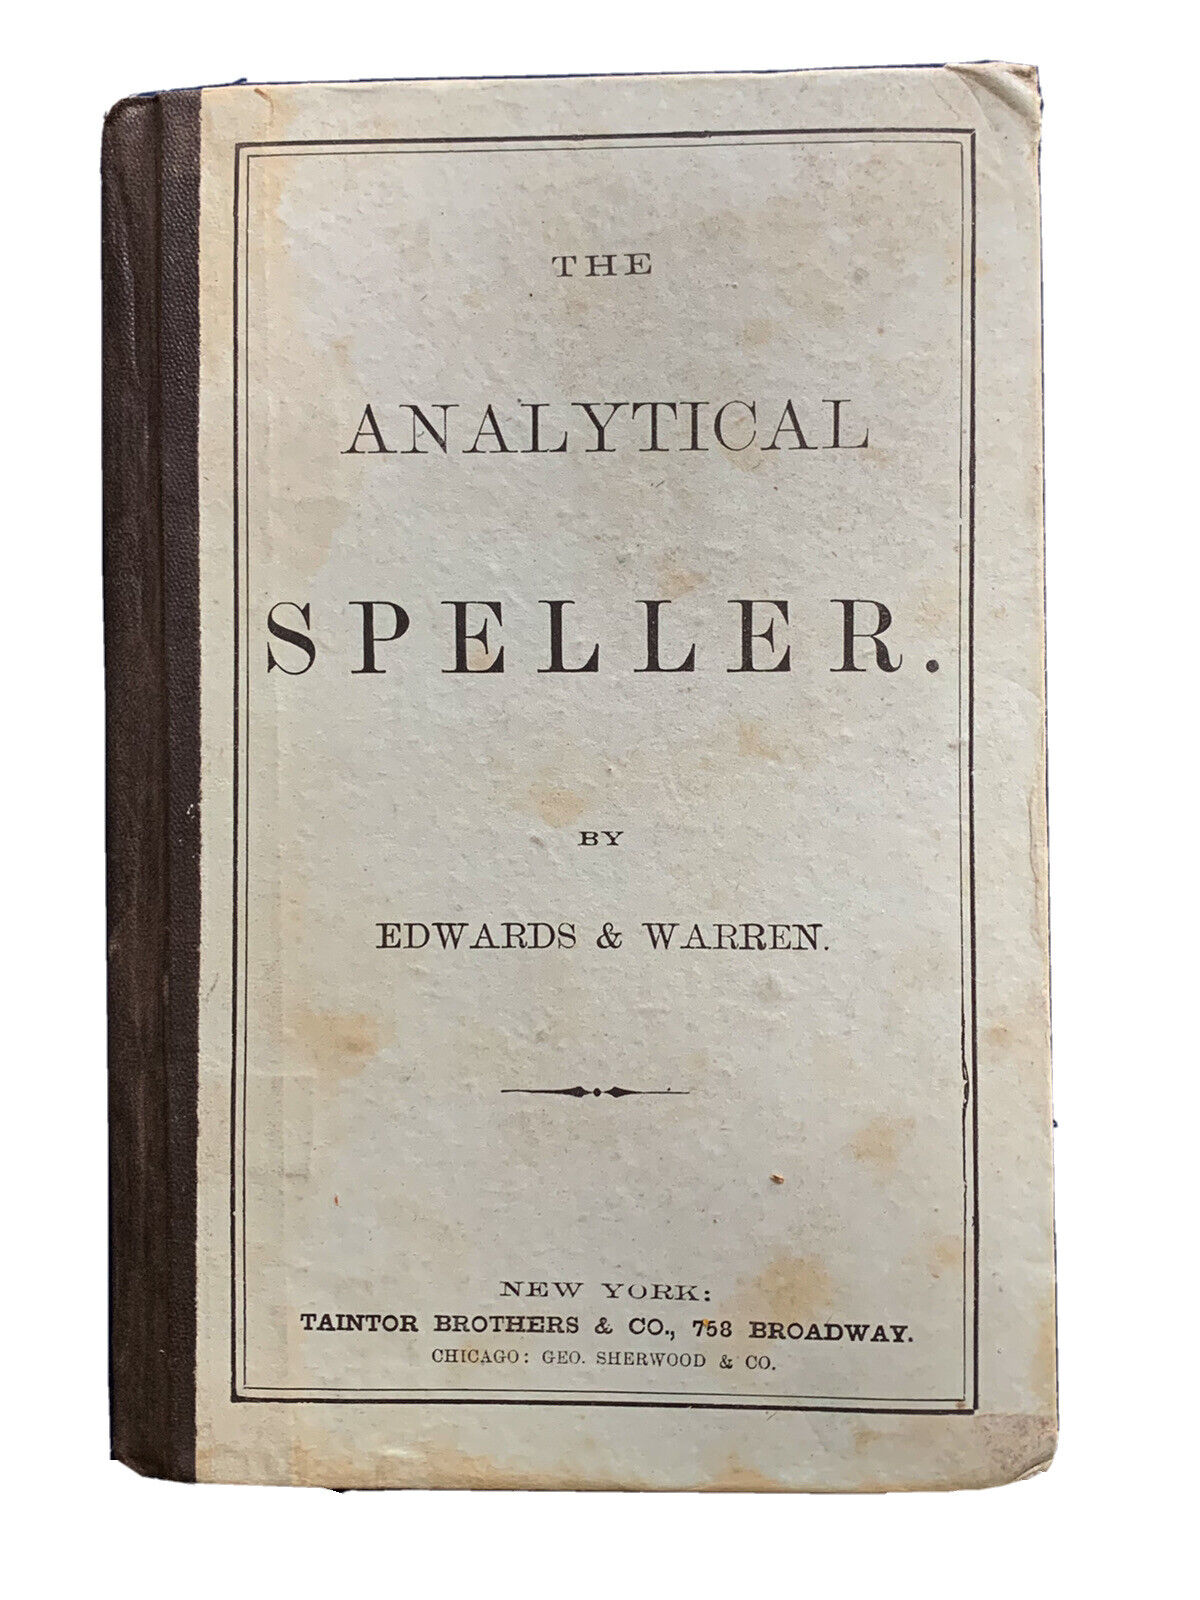 1871 antique hardcover school book The Analytical Speller small size 4 x 6